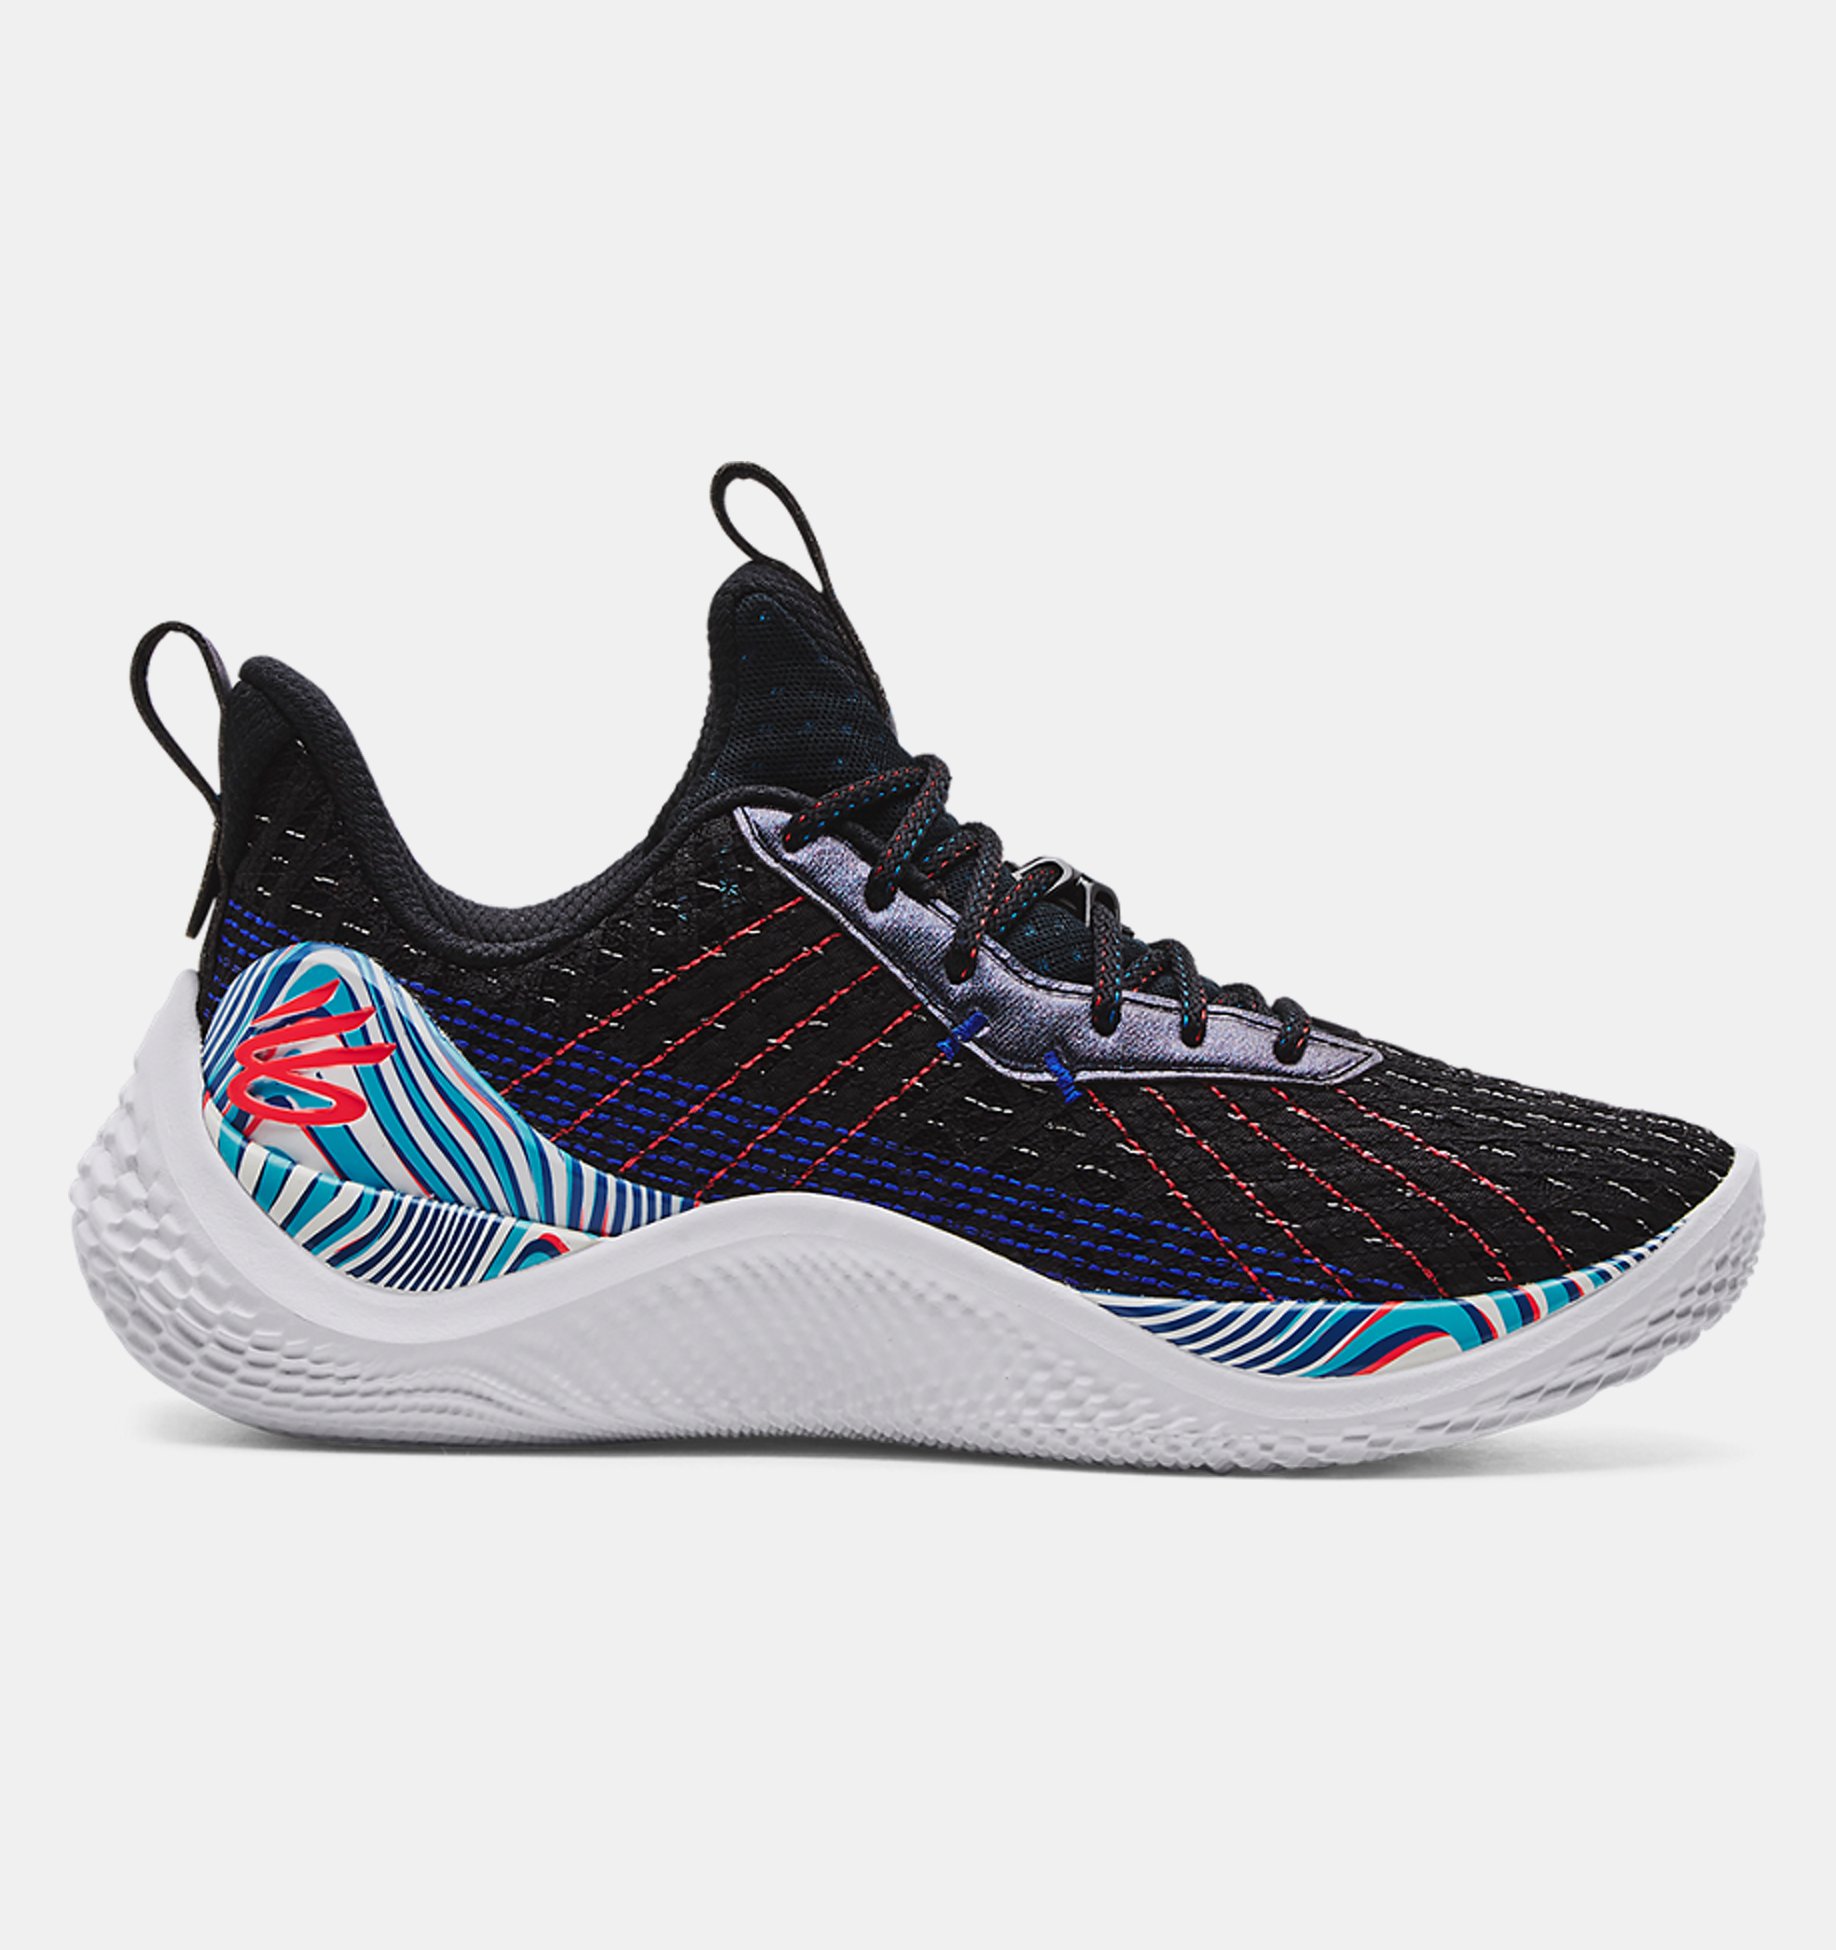 Unisex Curry Flow 10 'More Magic' Basketball Shoes | Under Armour